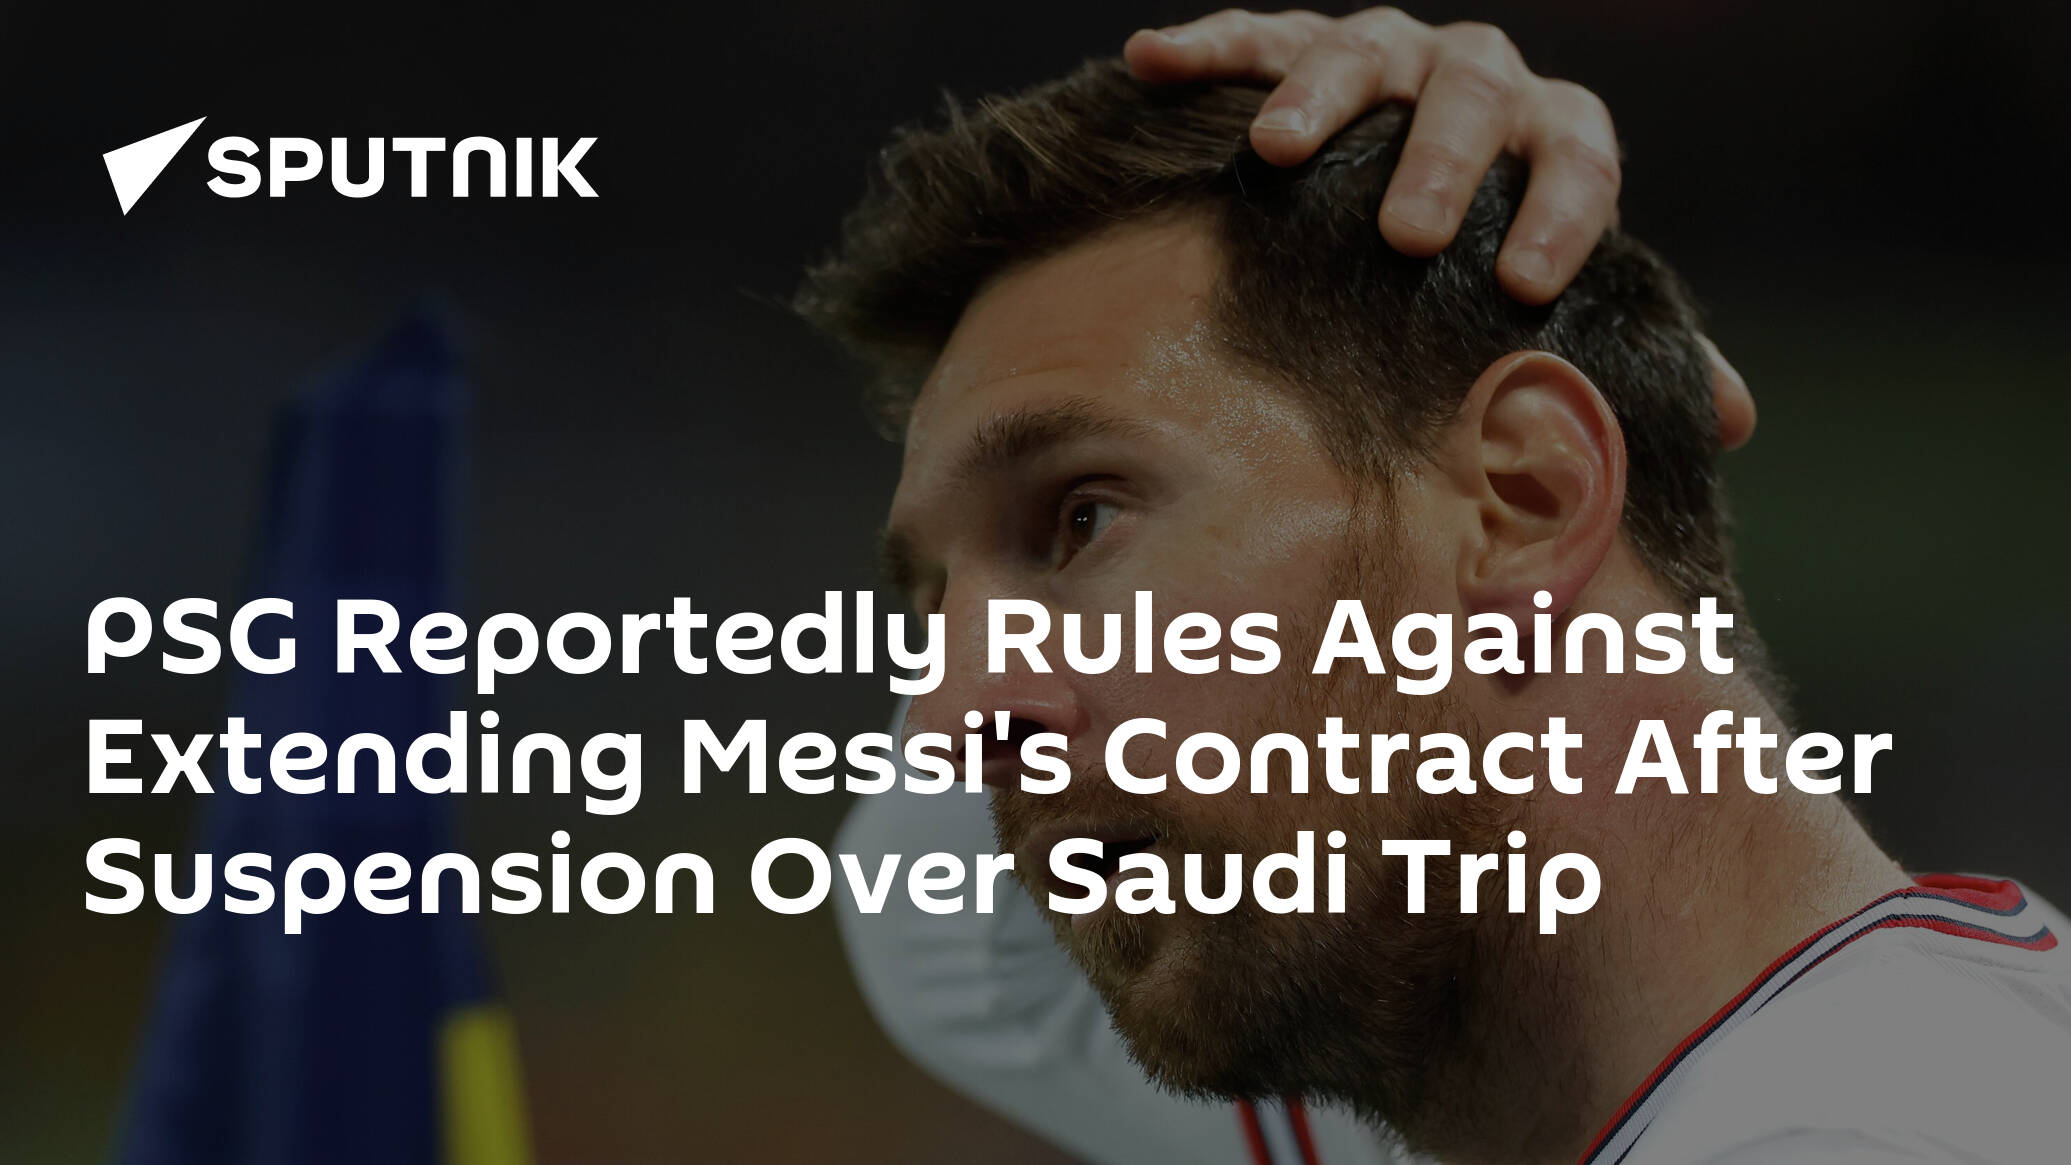 PSG Reportedly Rules Against Extending Messi's Contract After Suspension Over Saudi Trip